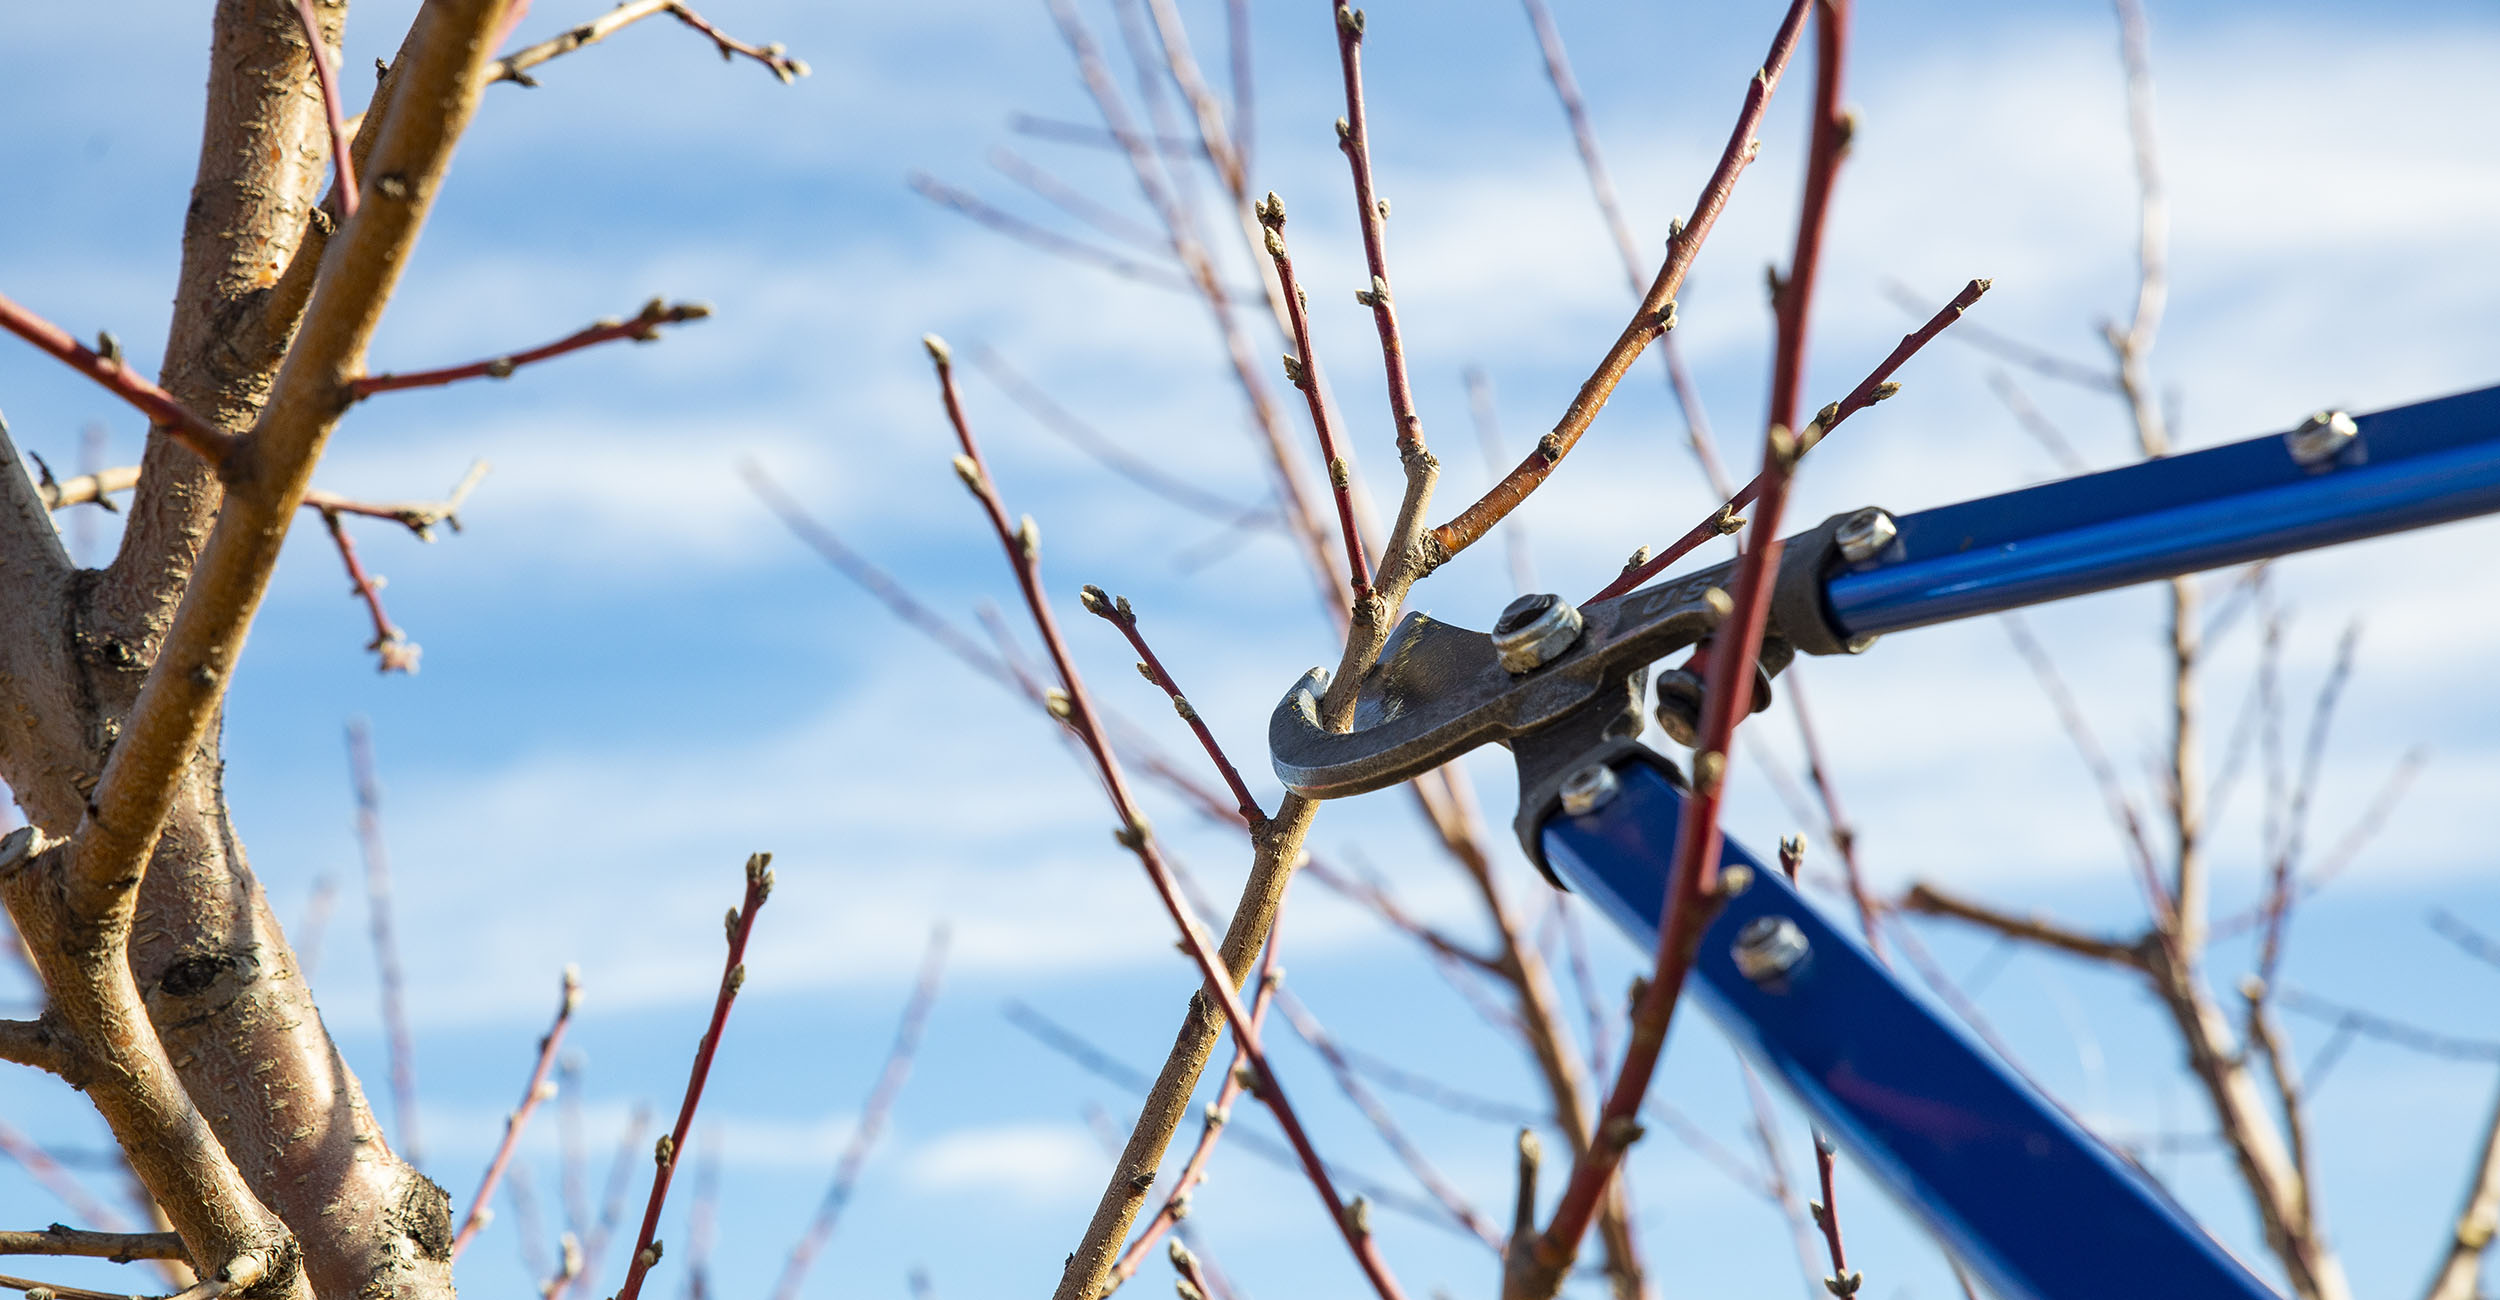 Pruning shears lopping off a branch.